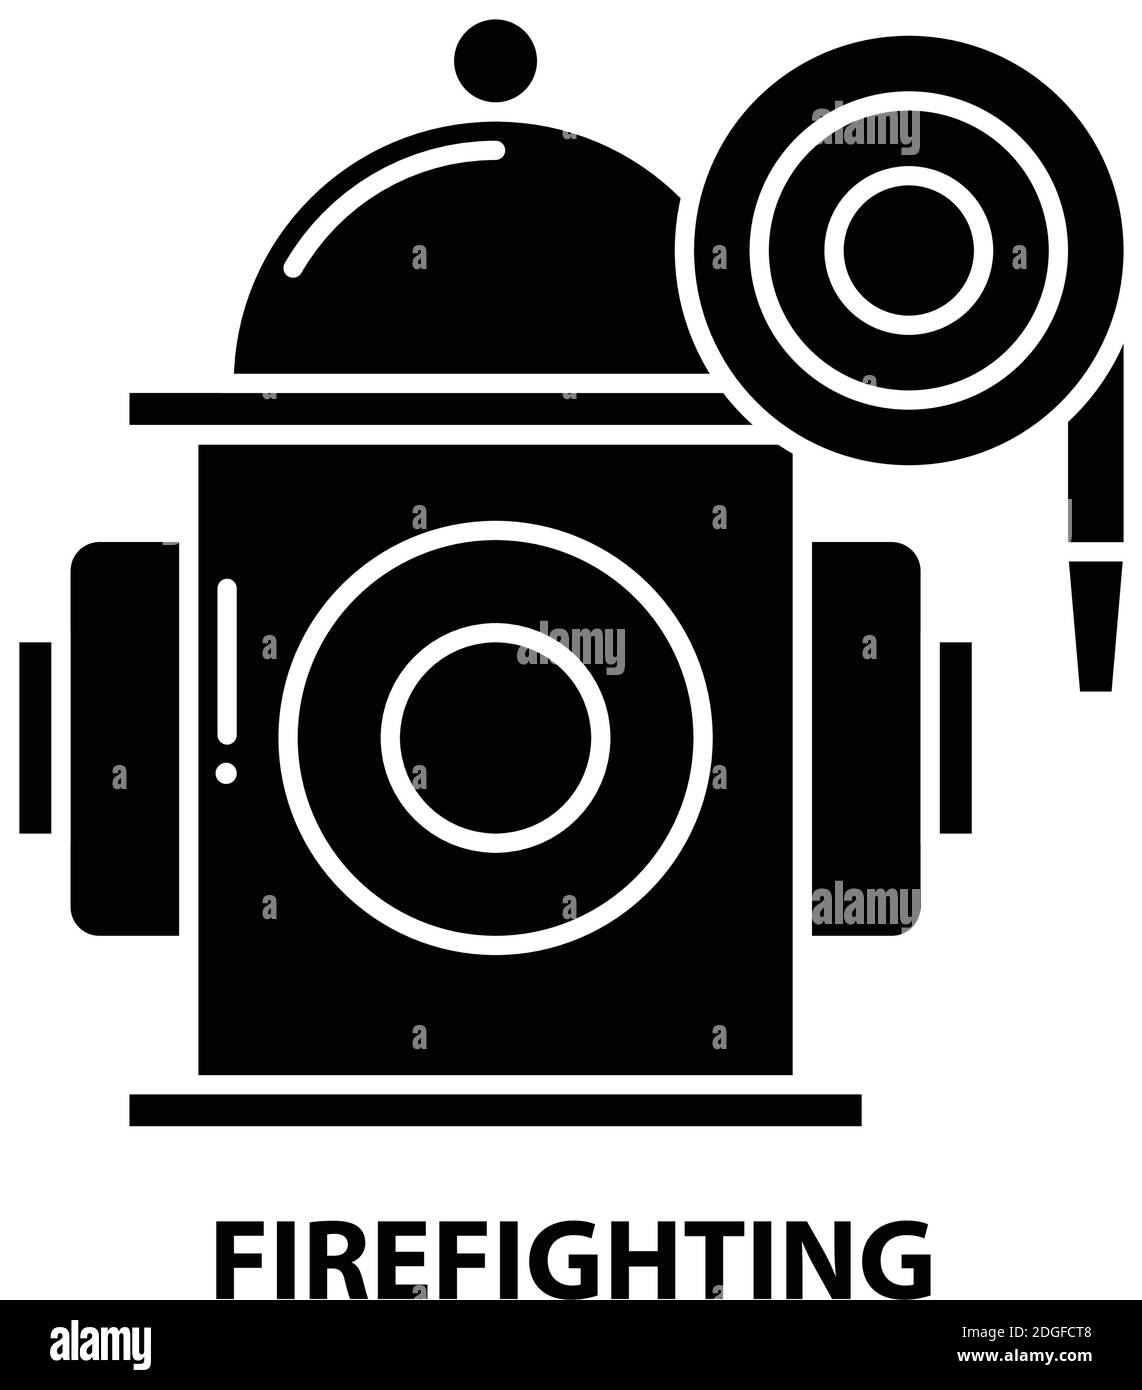 firefighting icon, black vector sign with editable strokes, concept illustration Stock Vector